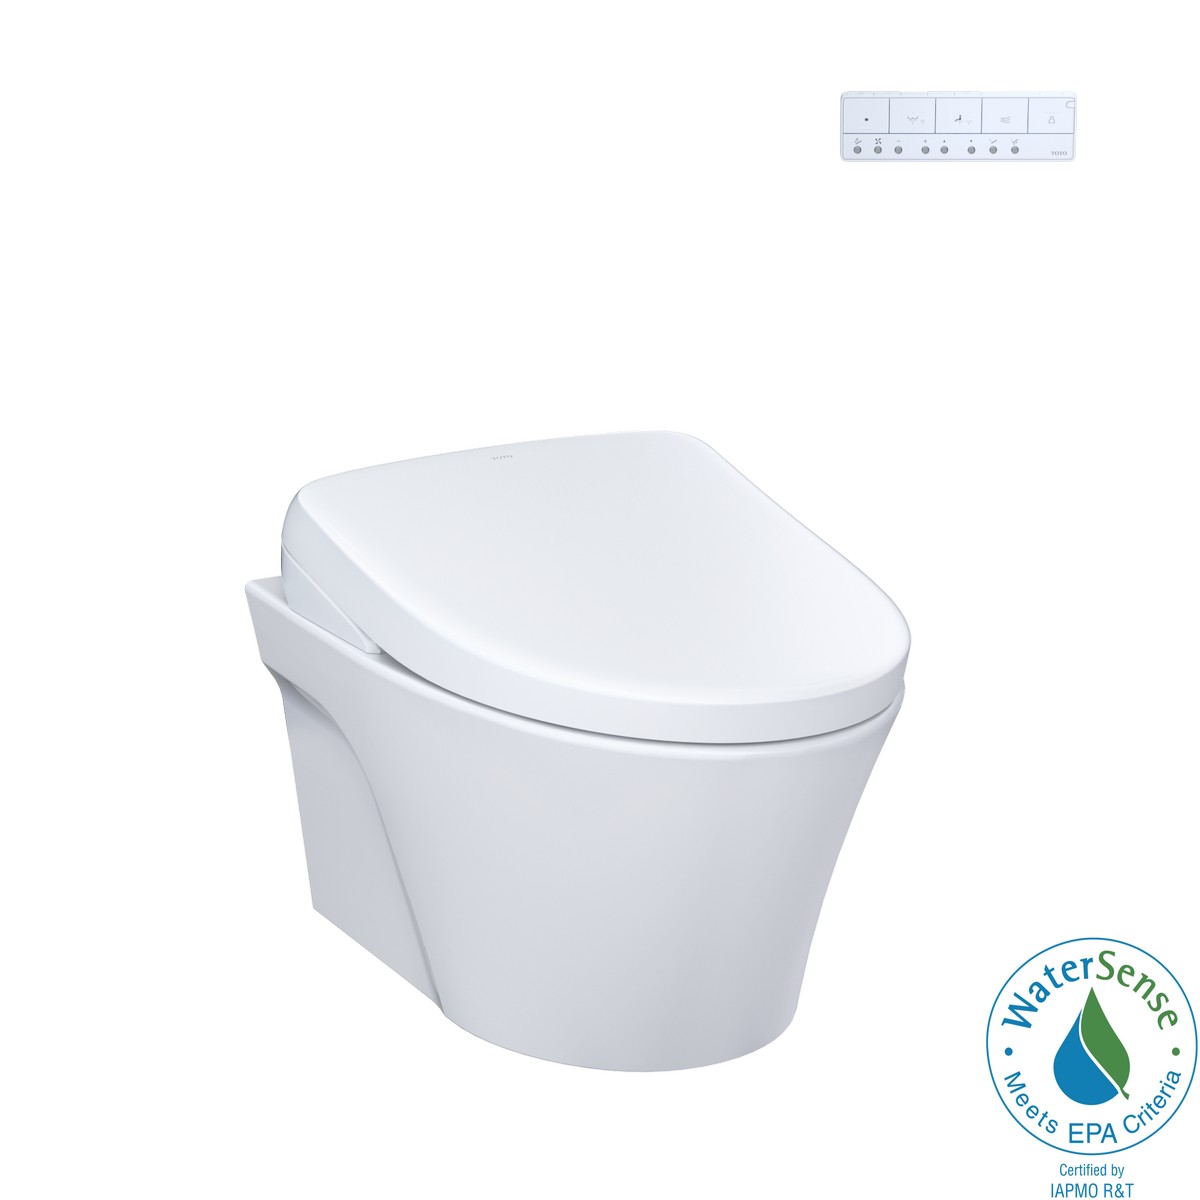 TOTO CWT4264726CMFG#MS WASHLET+ AP WALL-HUNG DUAL FLUSH ELONGATED TOILET WITH WASHLET S7 BIDET SEAT AND 0.9 AND 1.28 GPF DUO FIT IN-WALL TANK SYSTEM IN MATTE SILVER